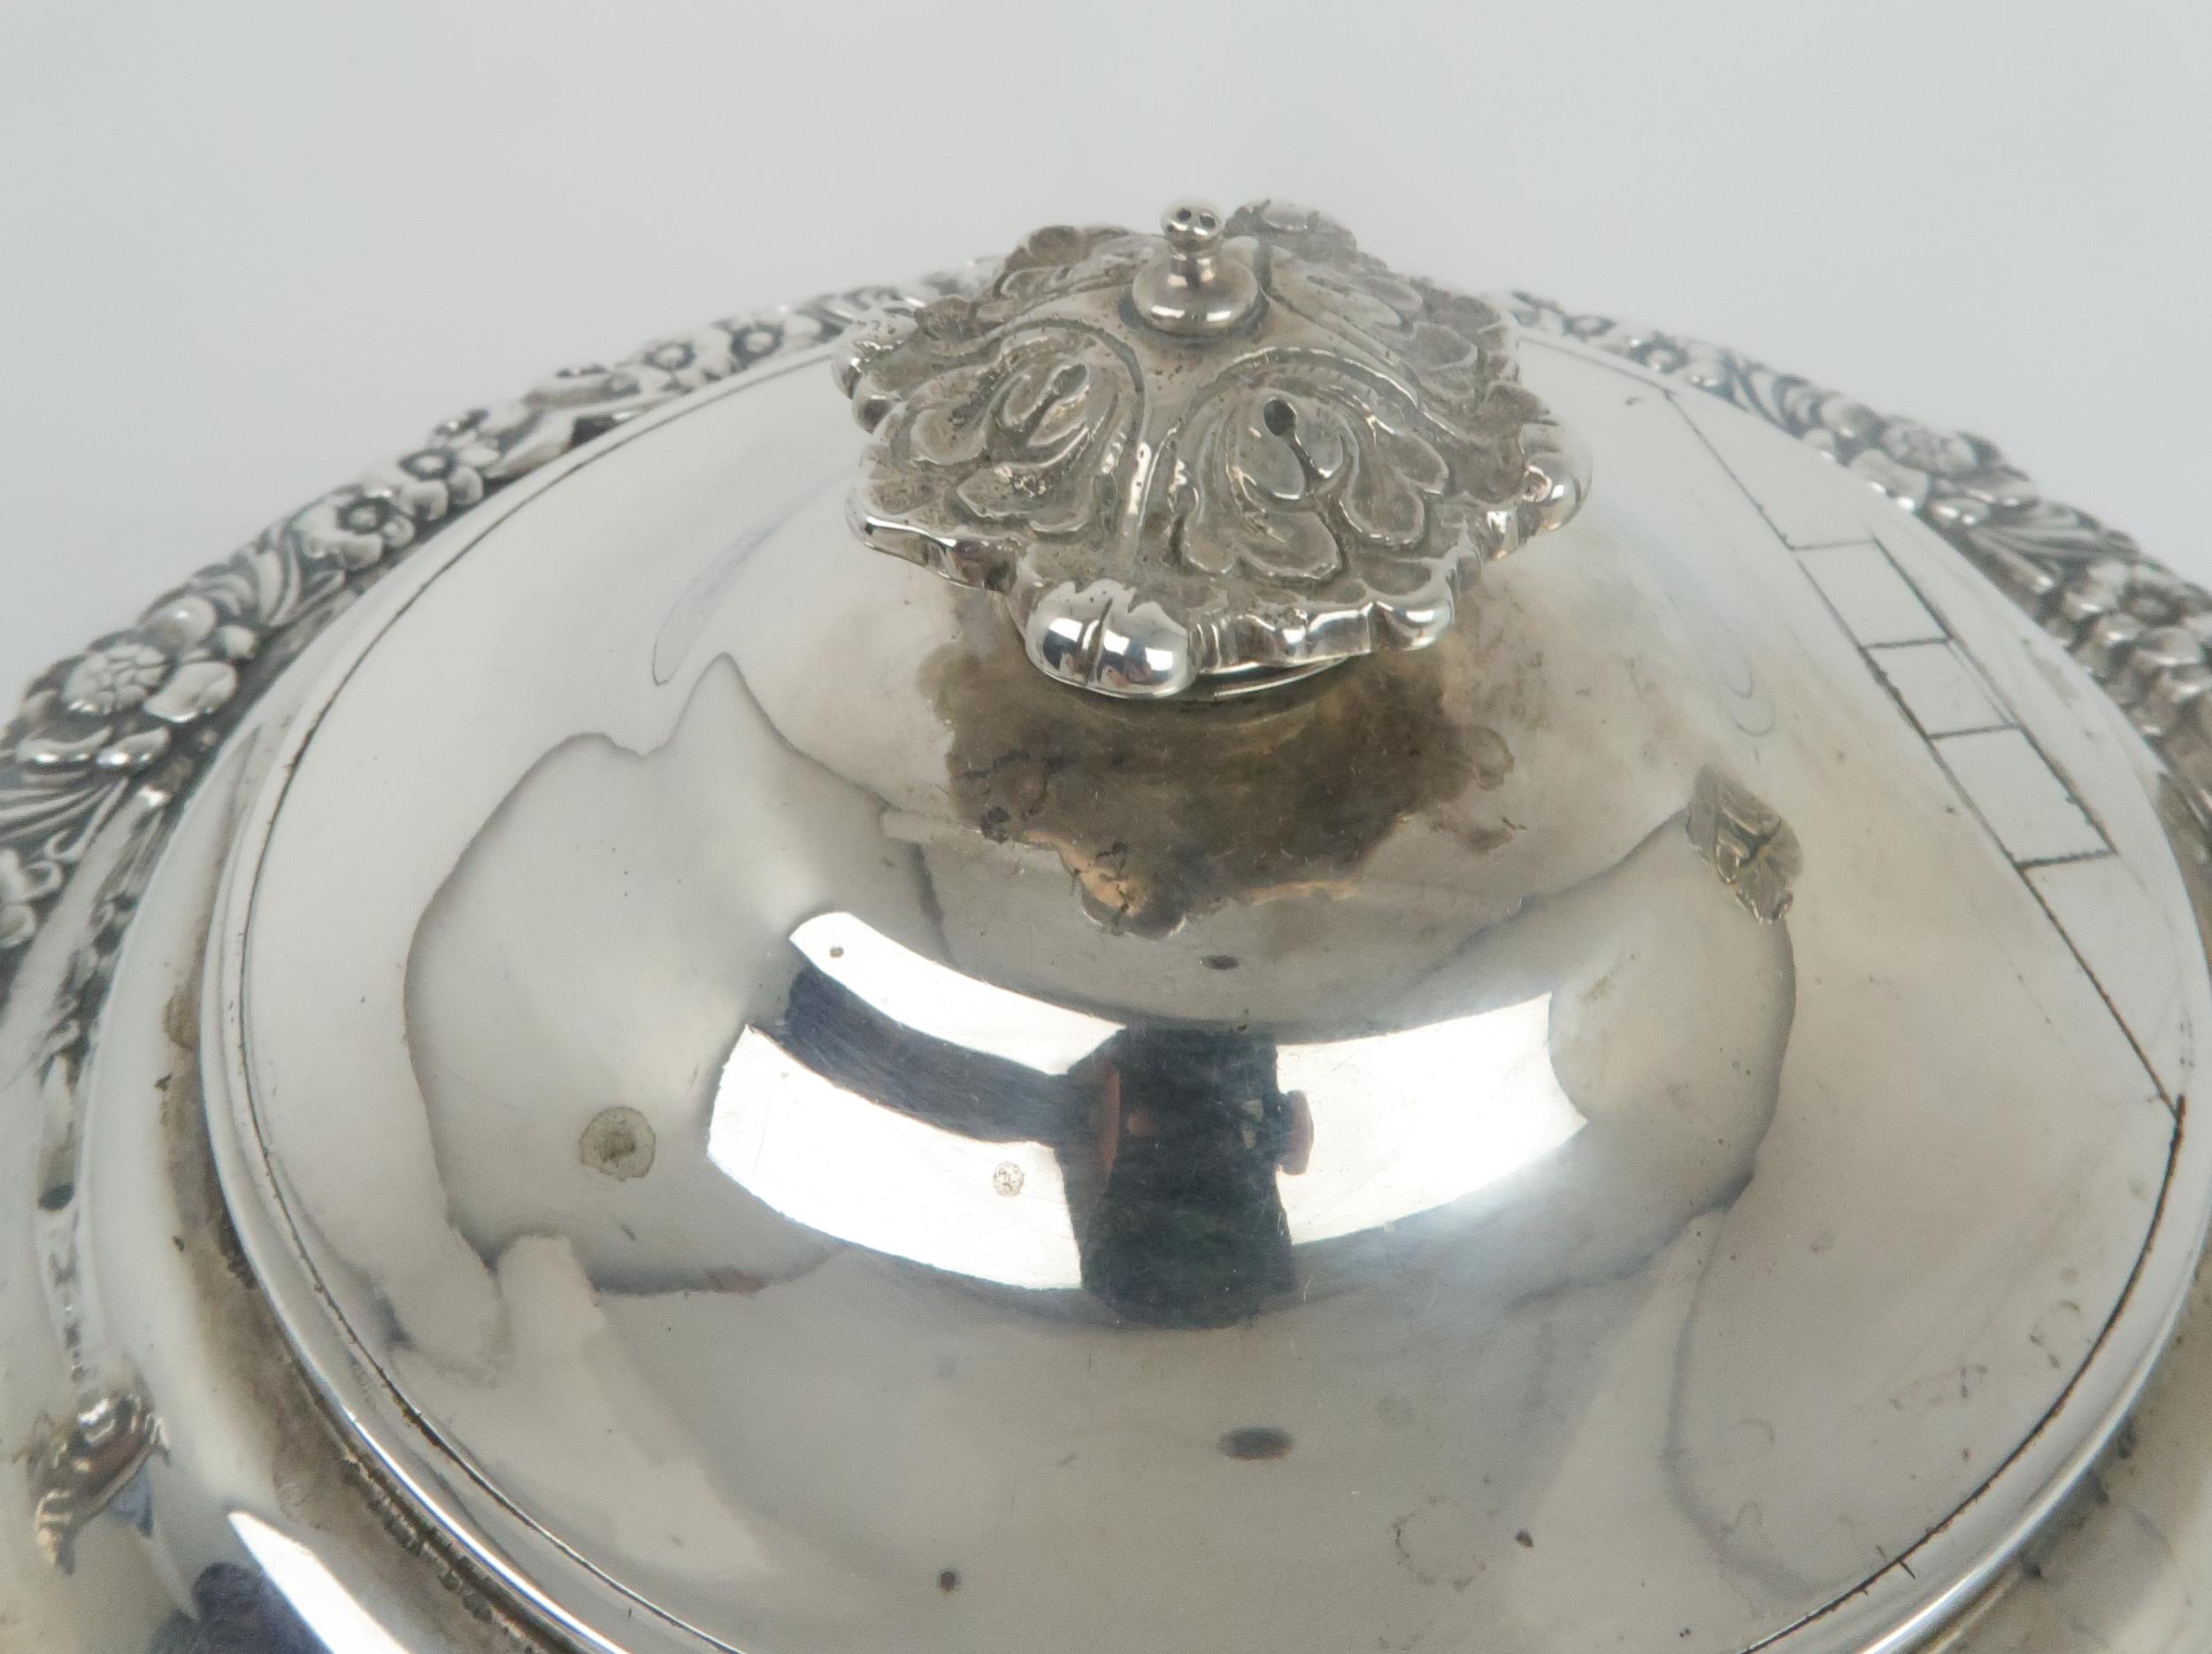 A GEORGE IV SCOTTISH SILVER TEAPOT by J Hay, Edinburgh 1820, of squat circular form, with an - Image 5 of 9